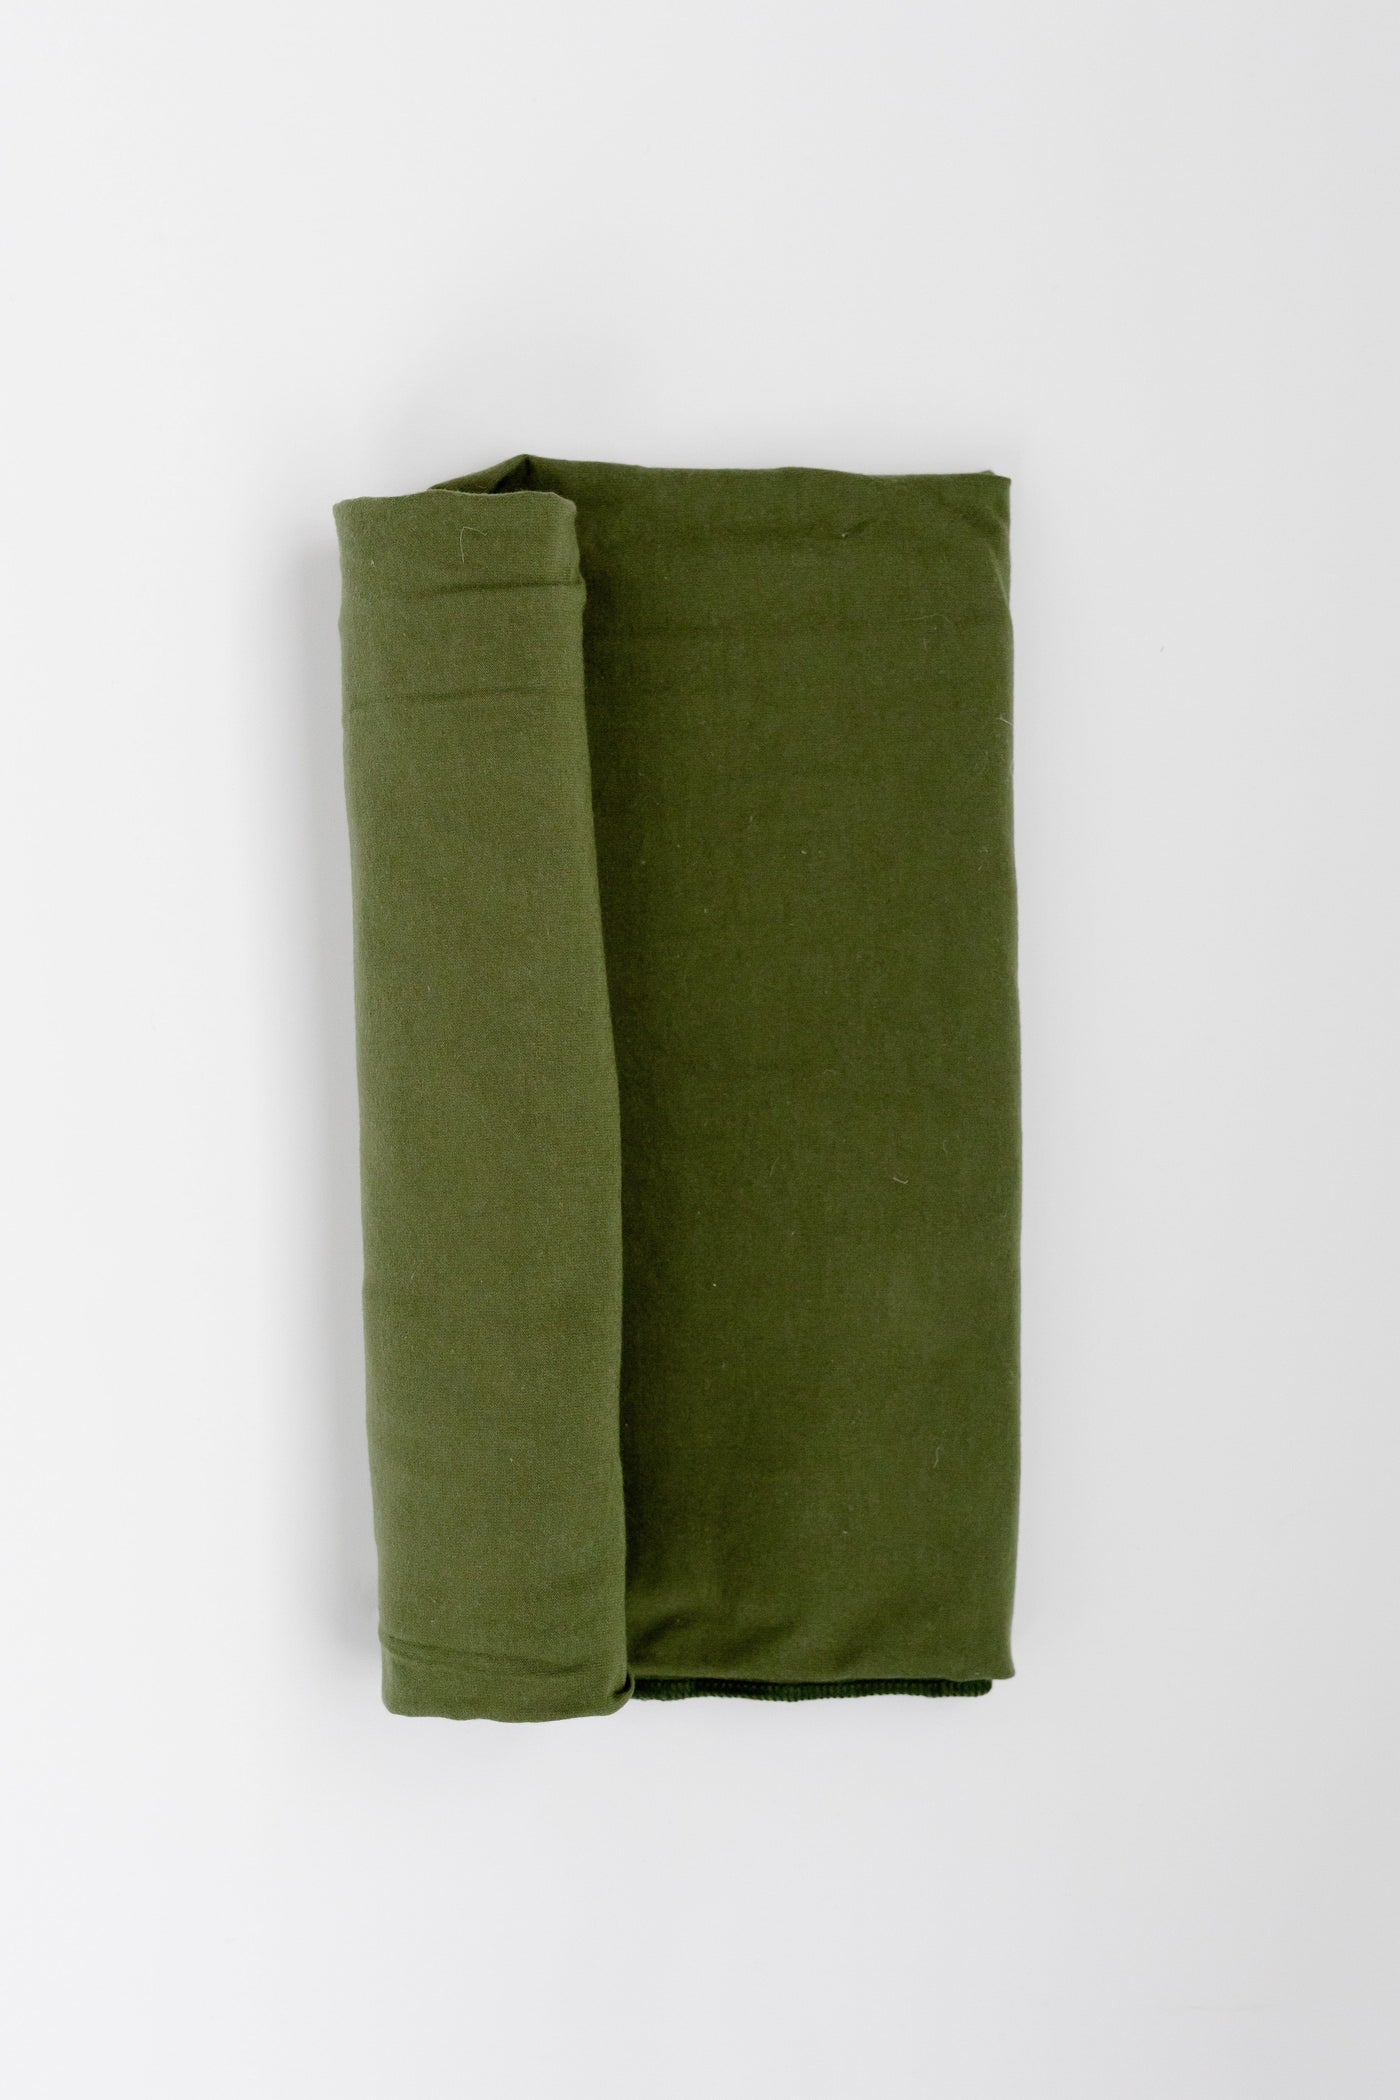 Mose Green Baby Swaddles